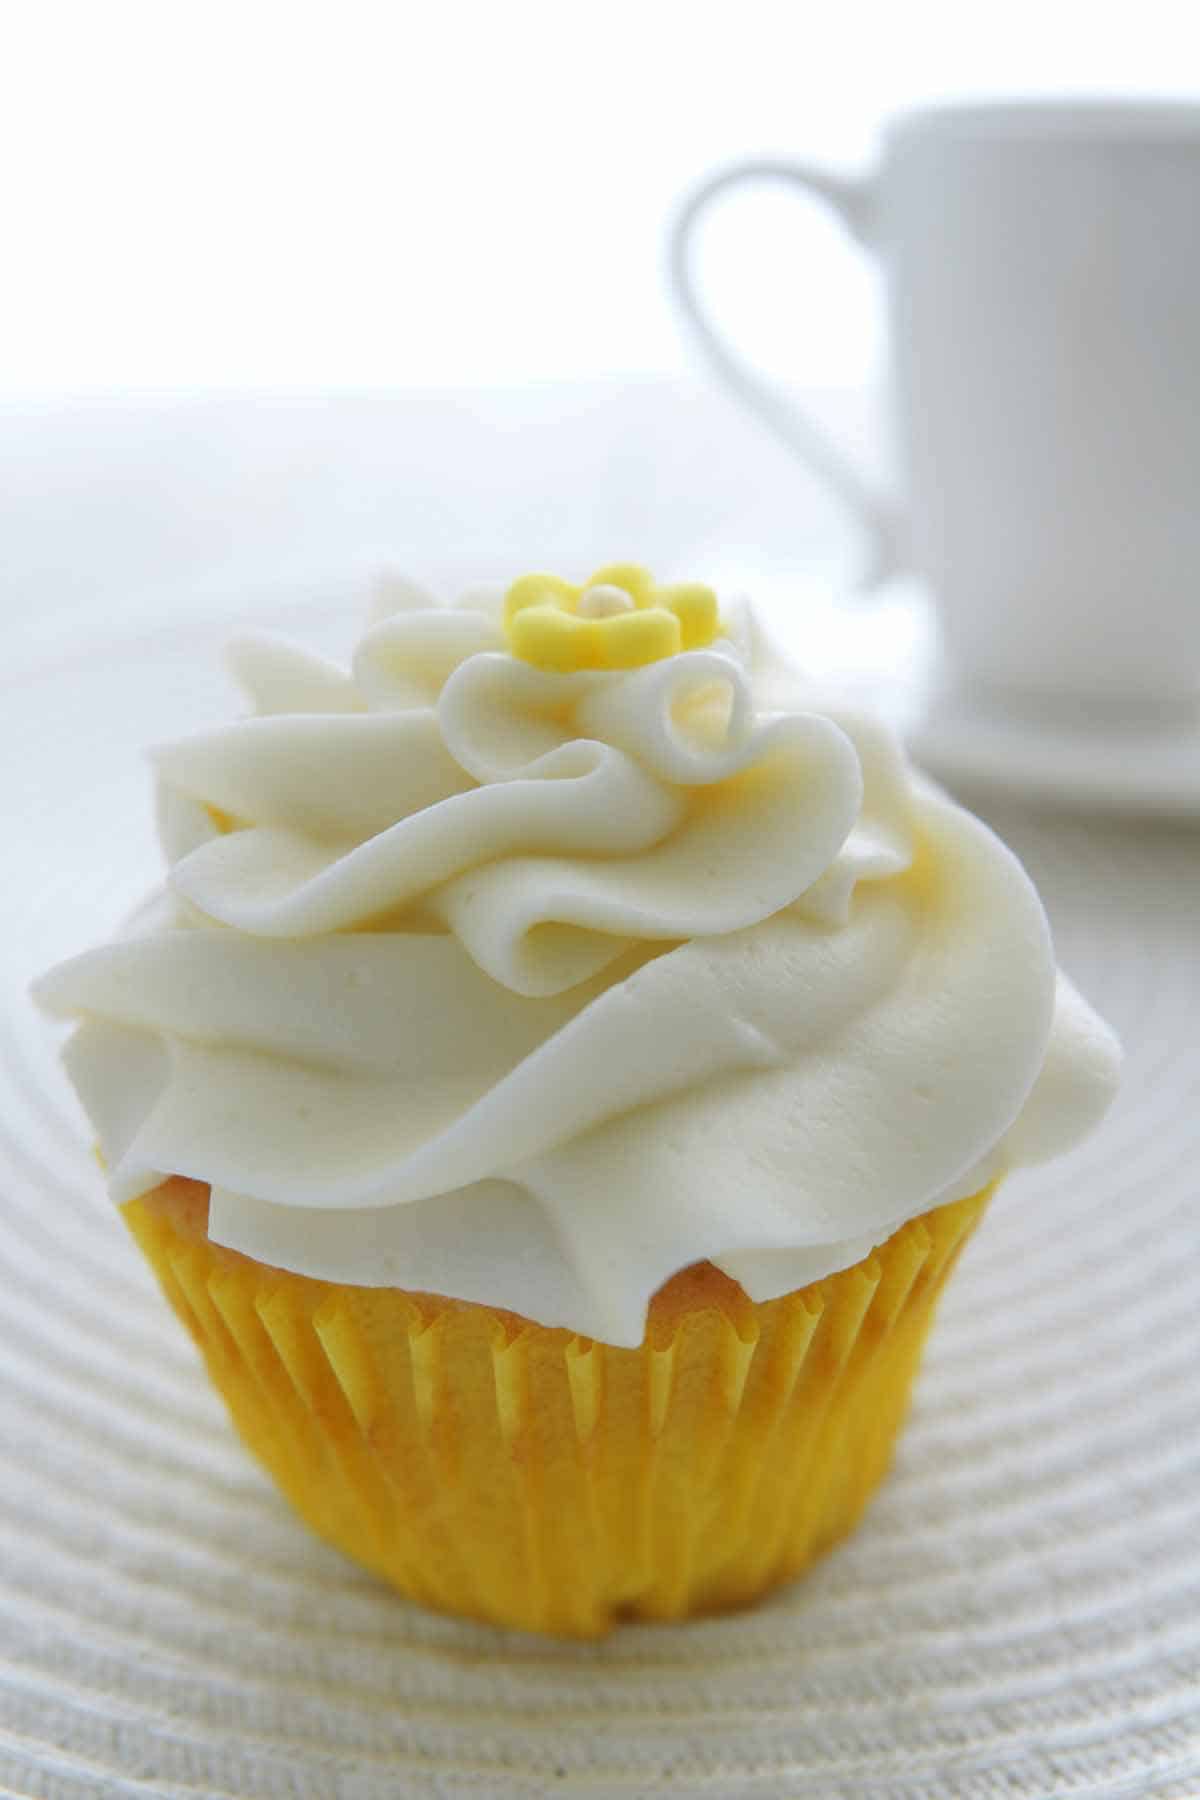 Lemon cupcake filled with whipped cream stabilized with vanilla instant pudding.